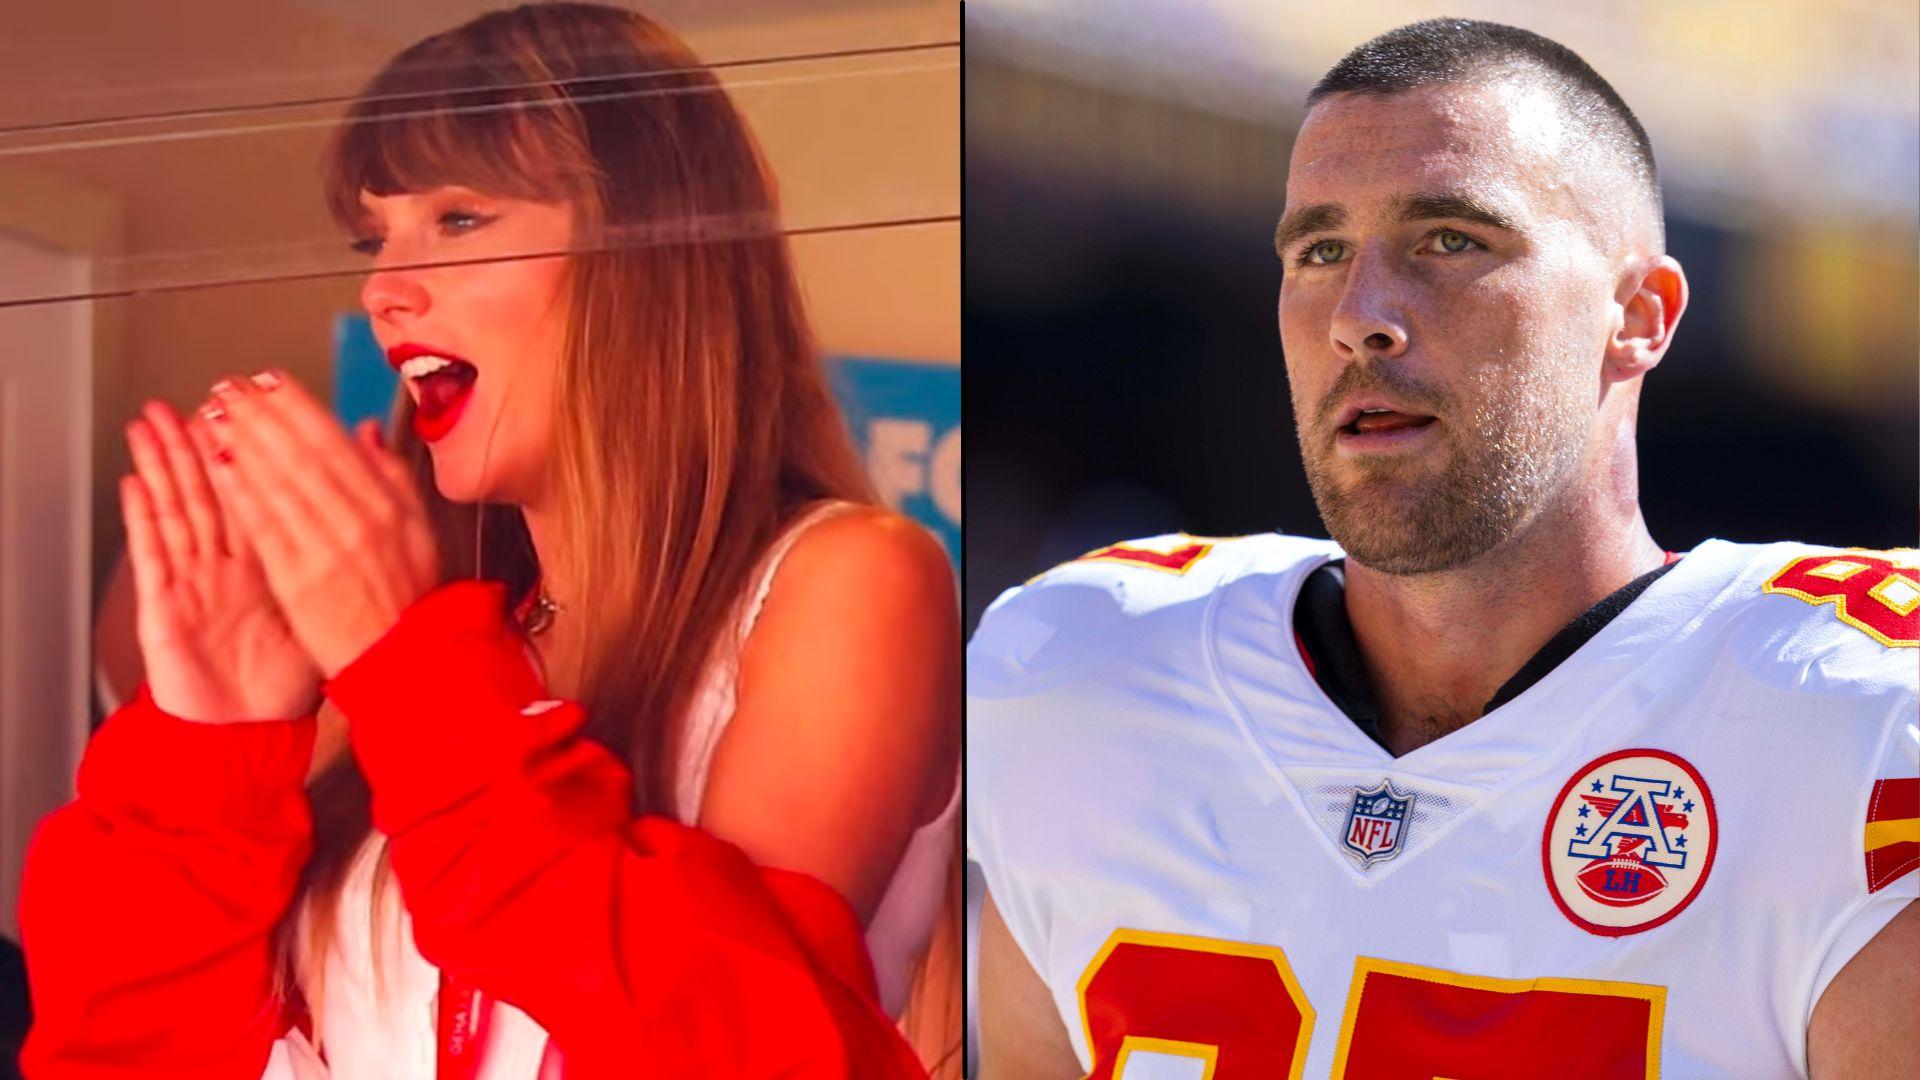 Taylor Swift clapping in red jacket side-by-side with Travis Kelce